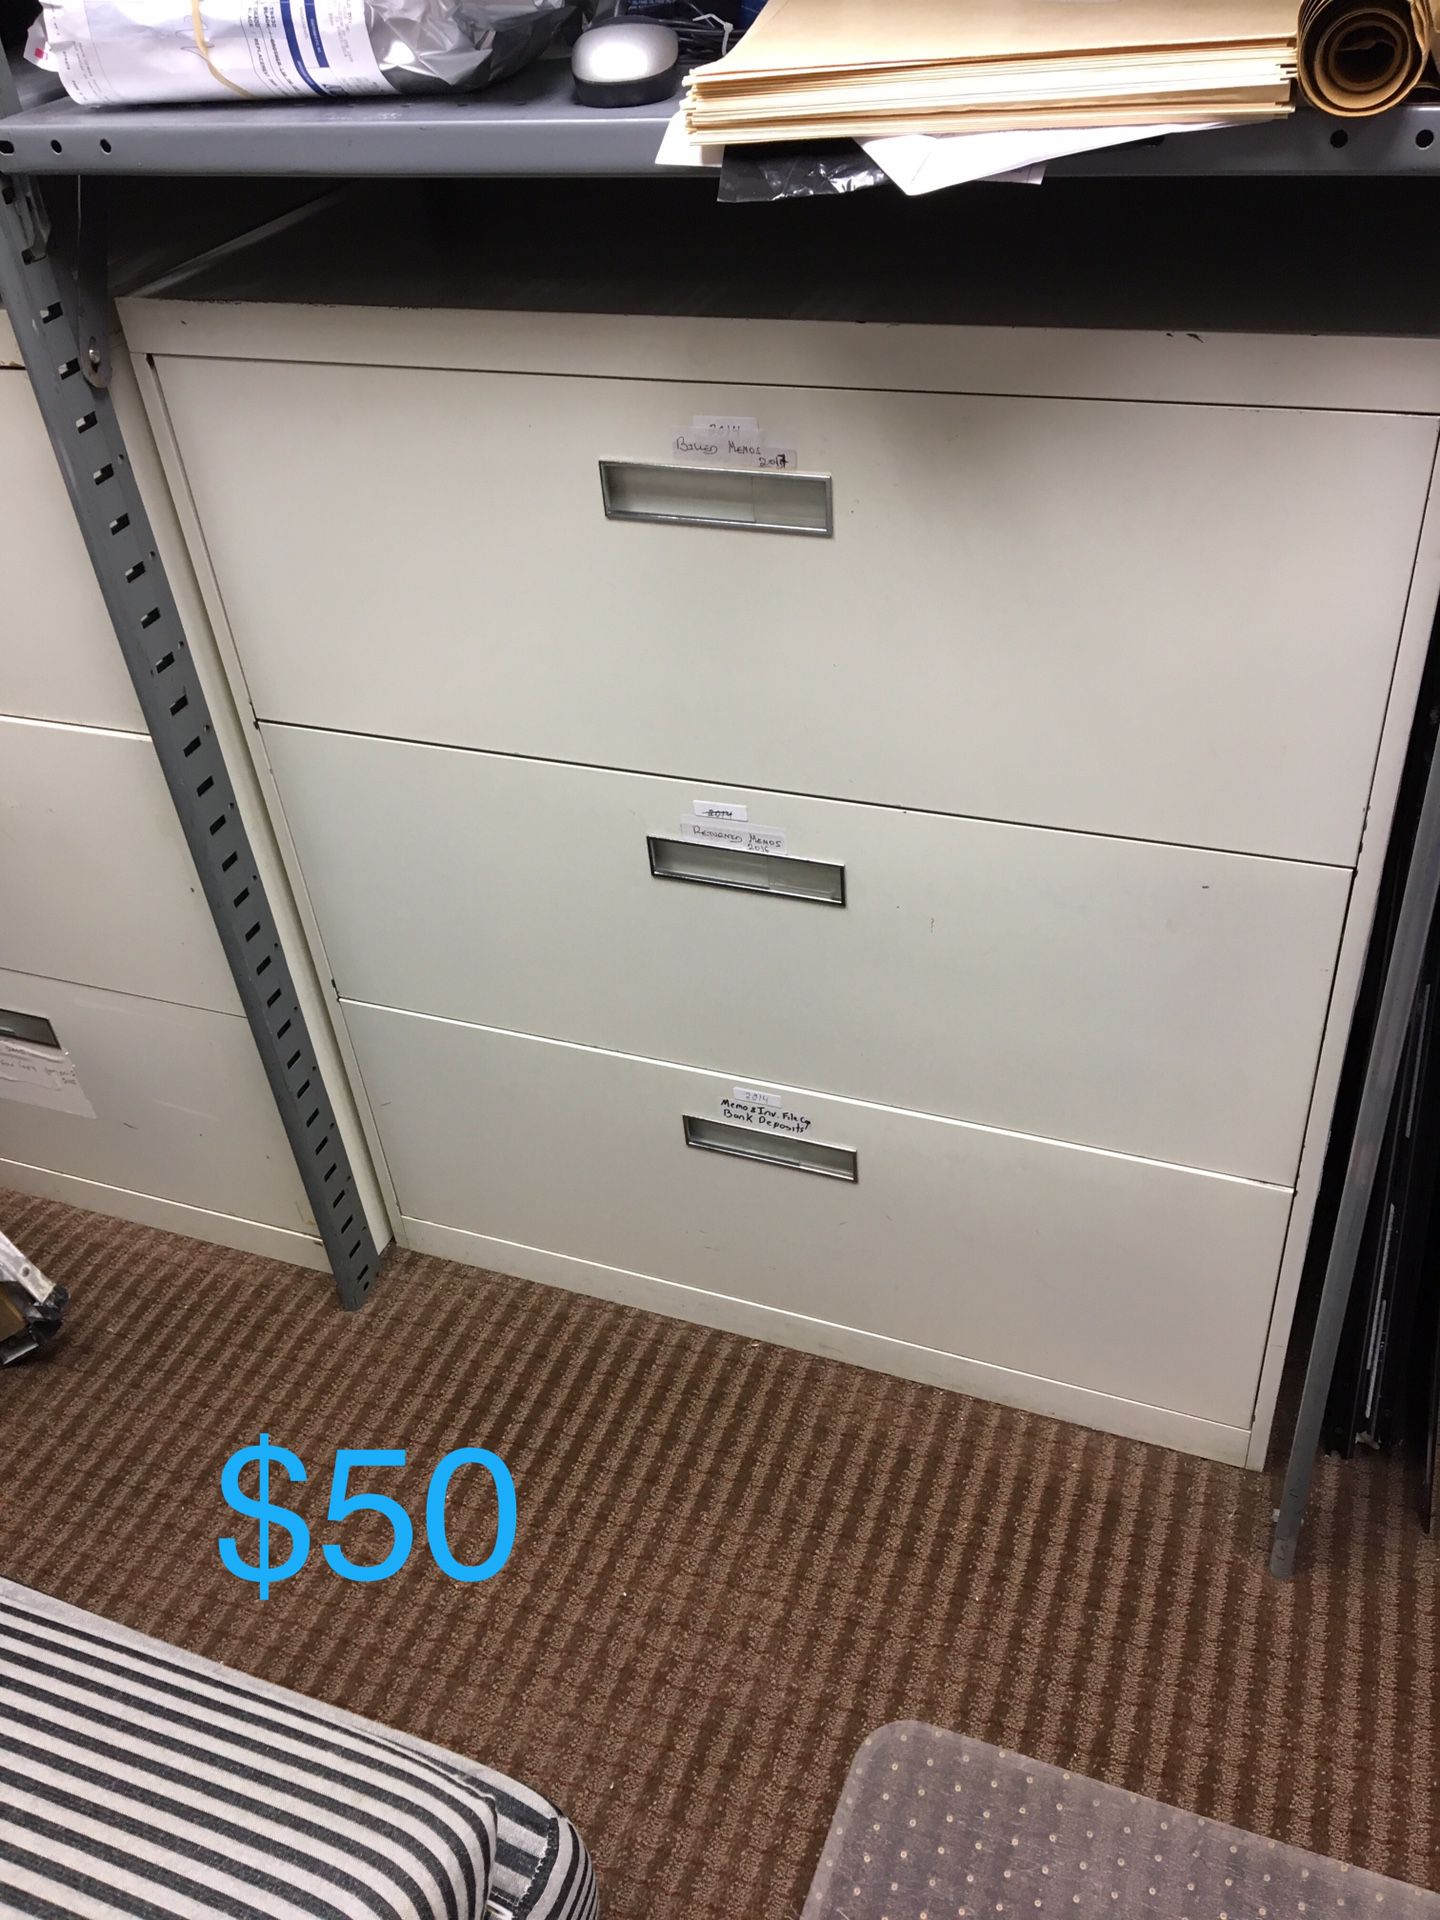 2 file cabinets with key lock